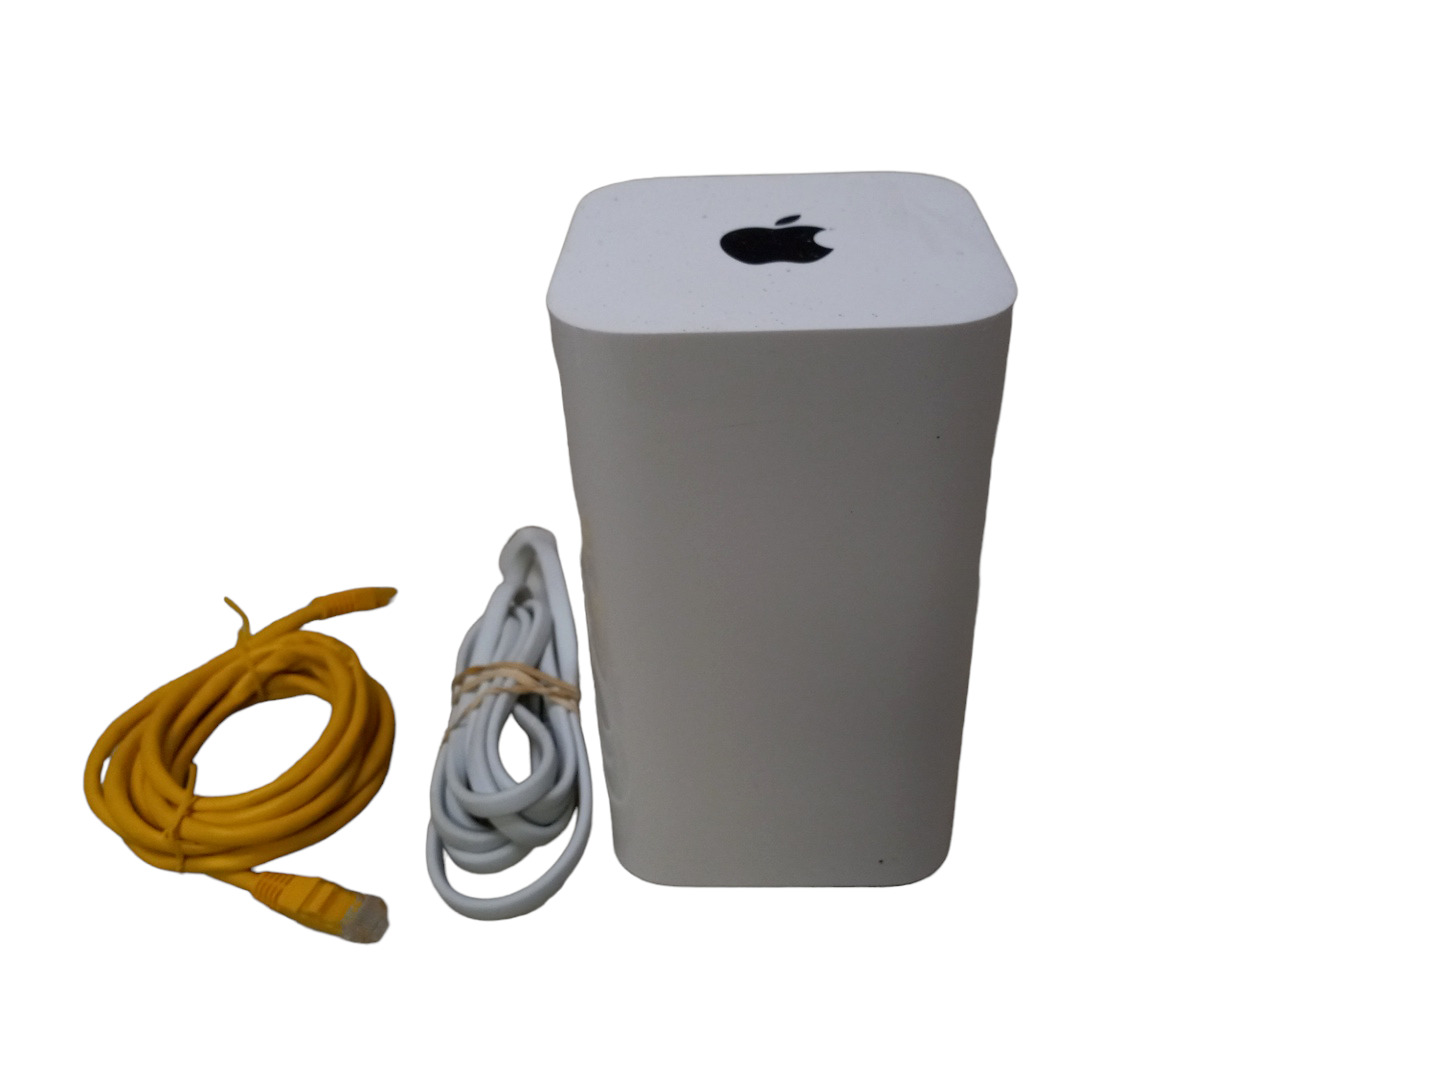 Apple AirPort Extreme A1521 3-Port Gigabit Wi-Fi 802.11 AC Router ME918LL/A